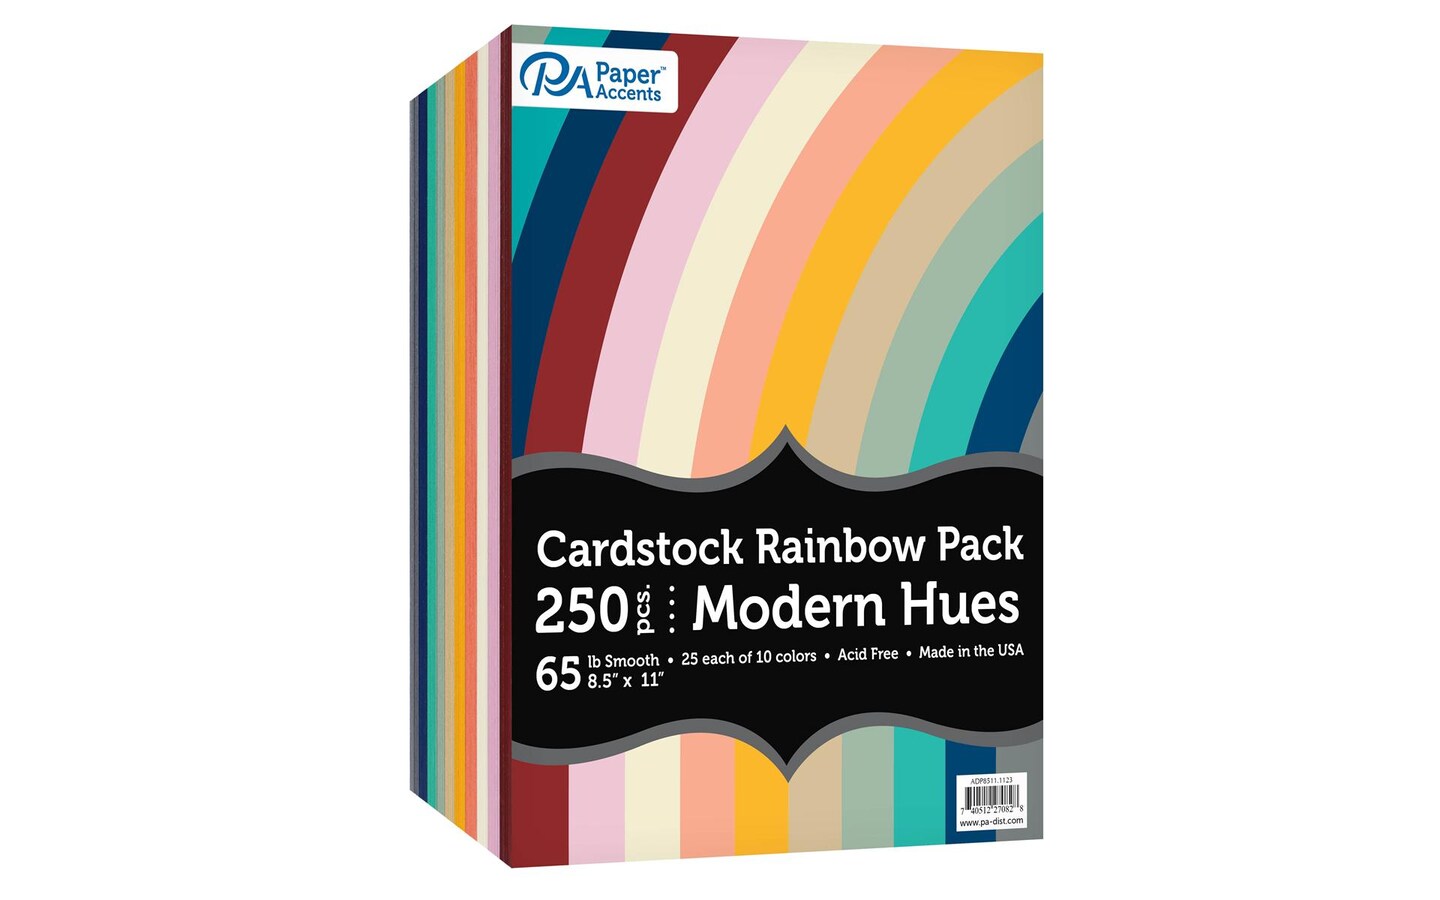 PA Paper Accents Rainbow Cardstock 12 x 12 Variety Pack, Modern Hues,  65lb colored cardstock paper for card making, scrapbooking, printing,  quilling